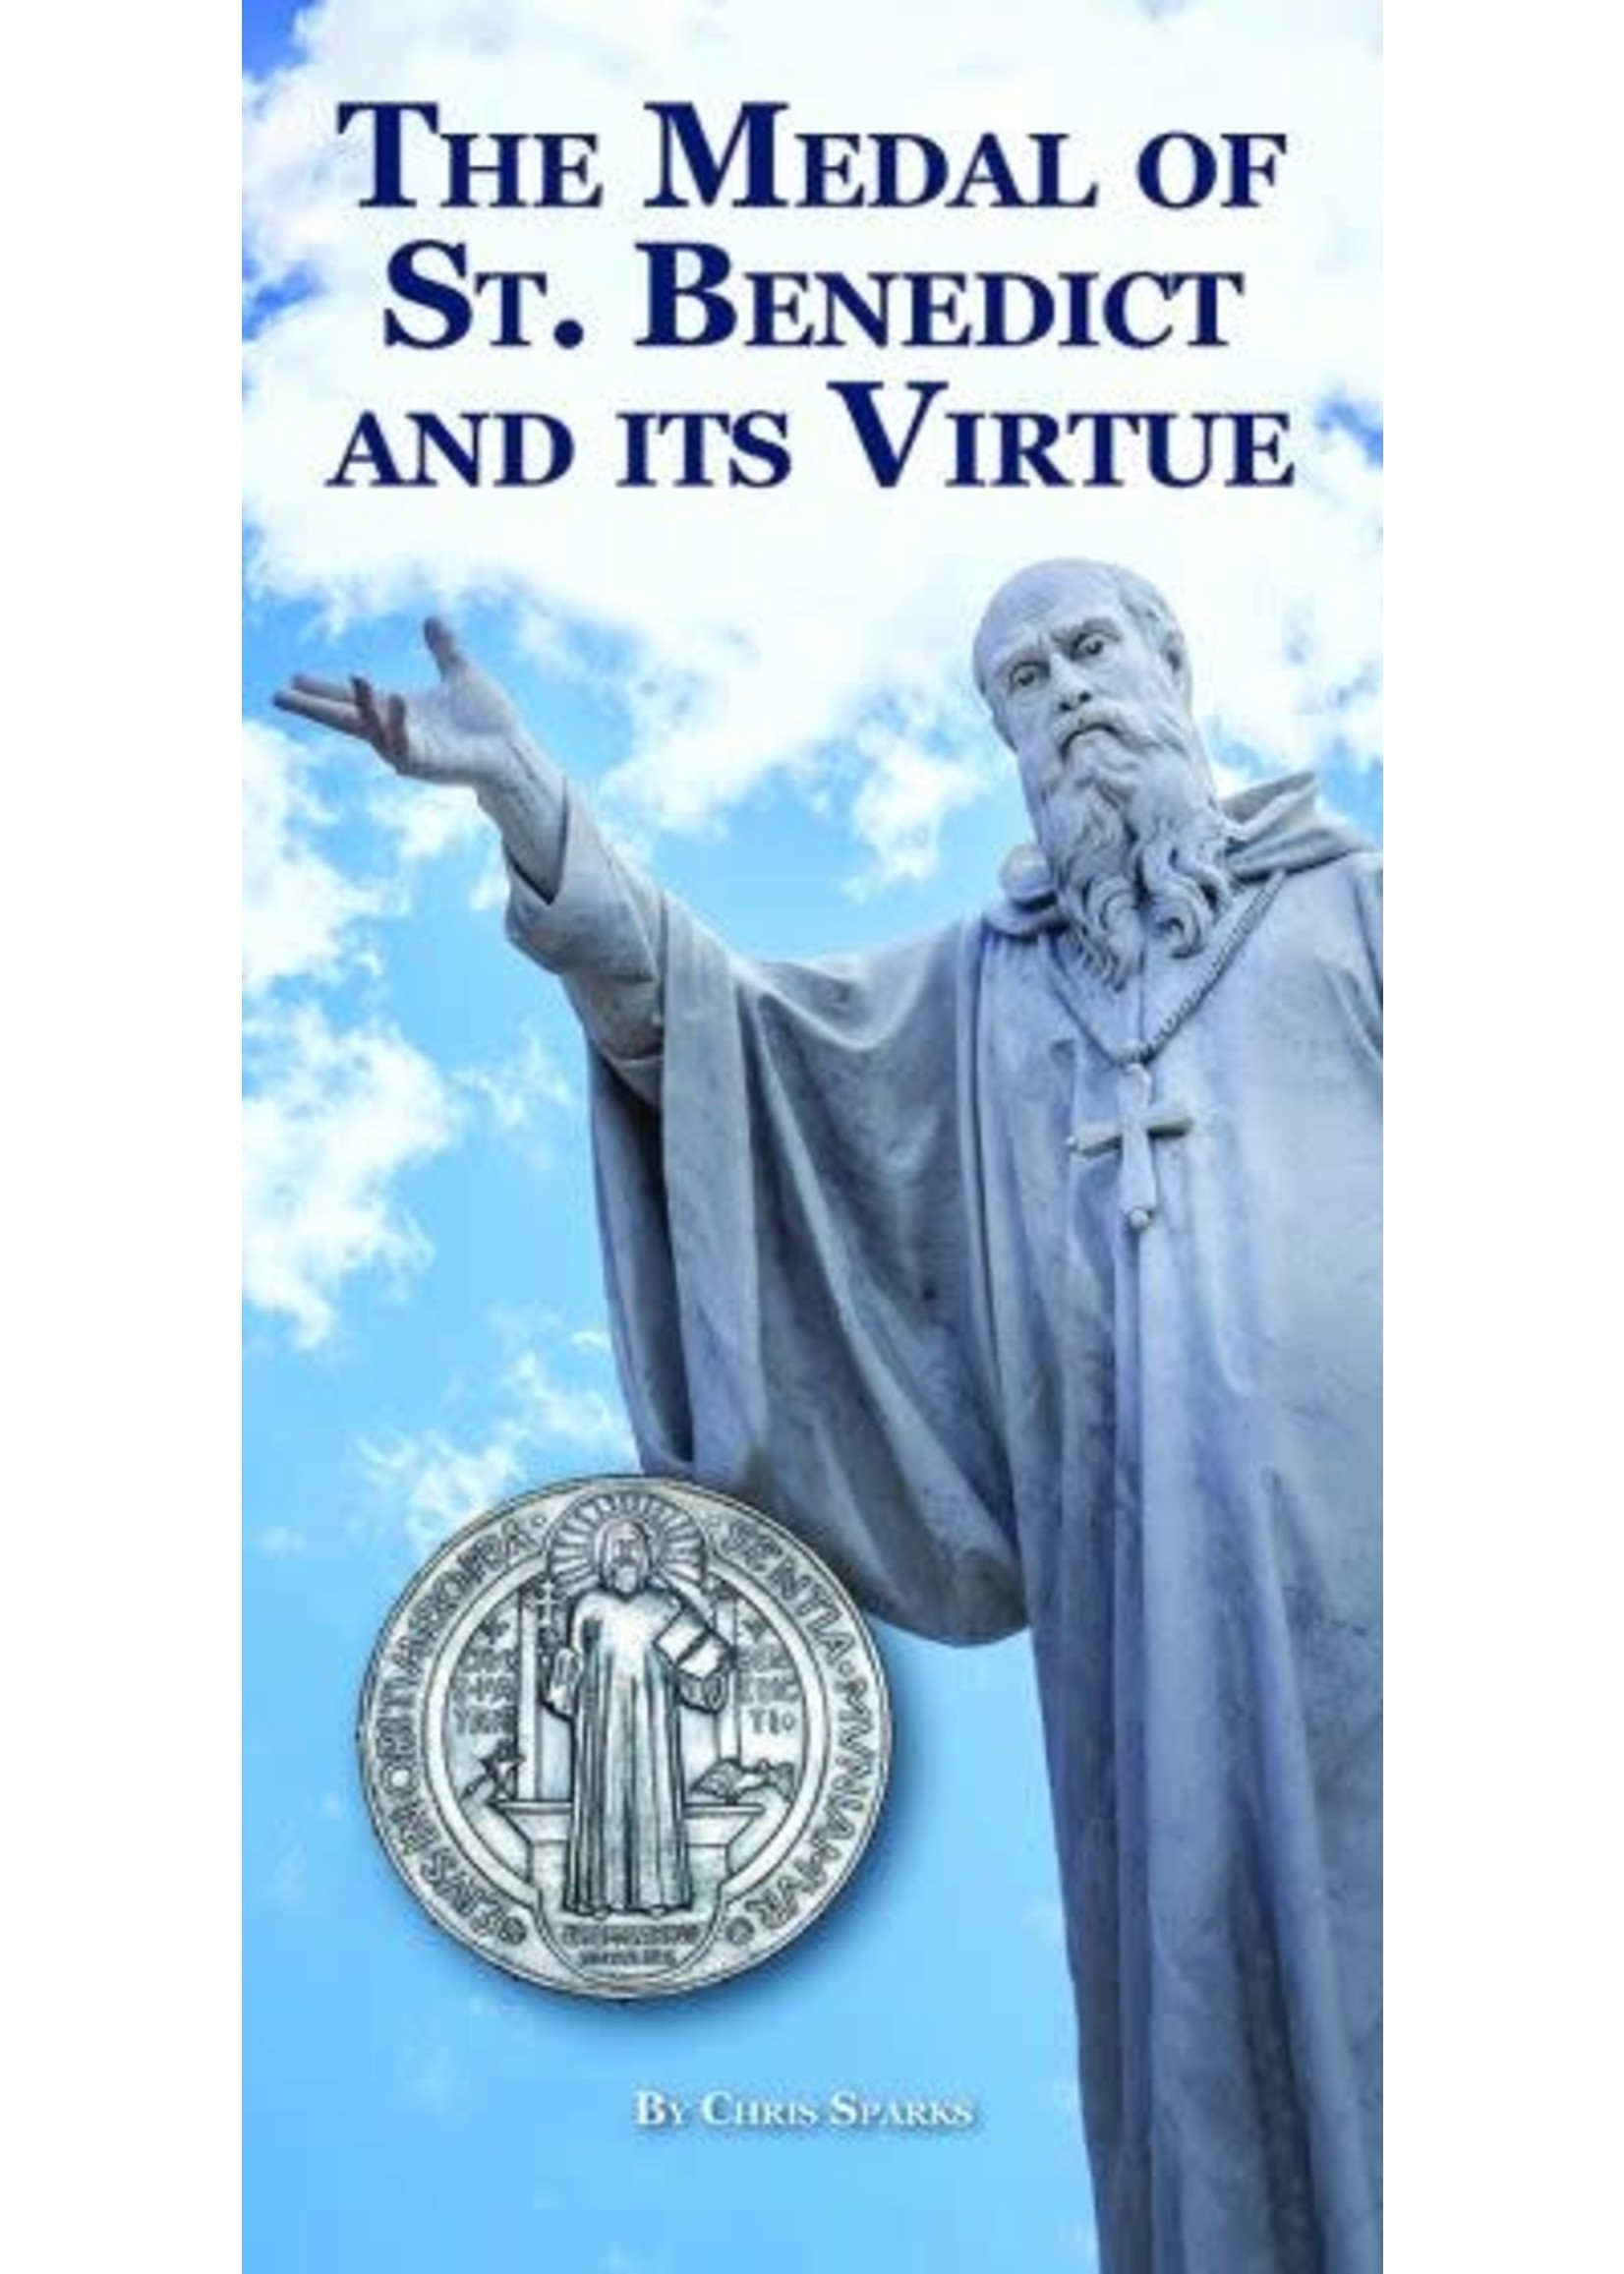 The Medal of St Benedict and its Virtue